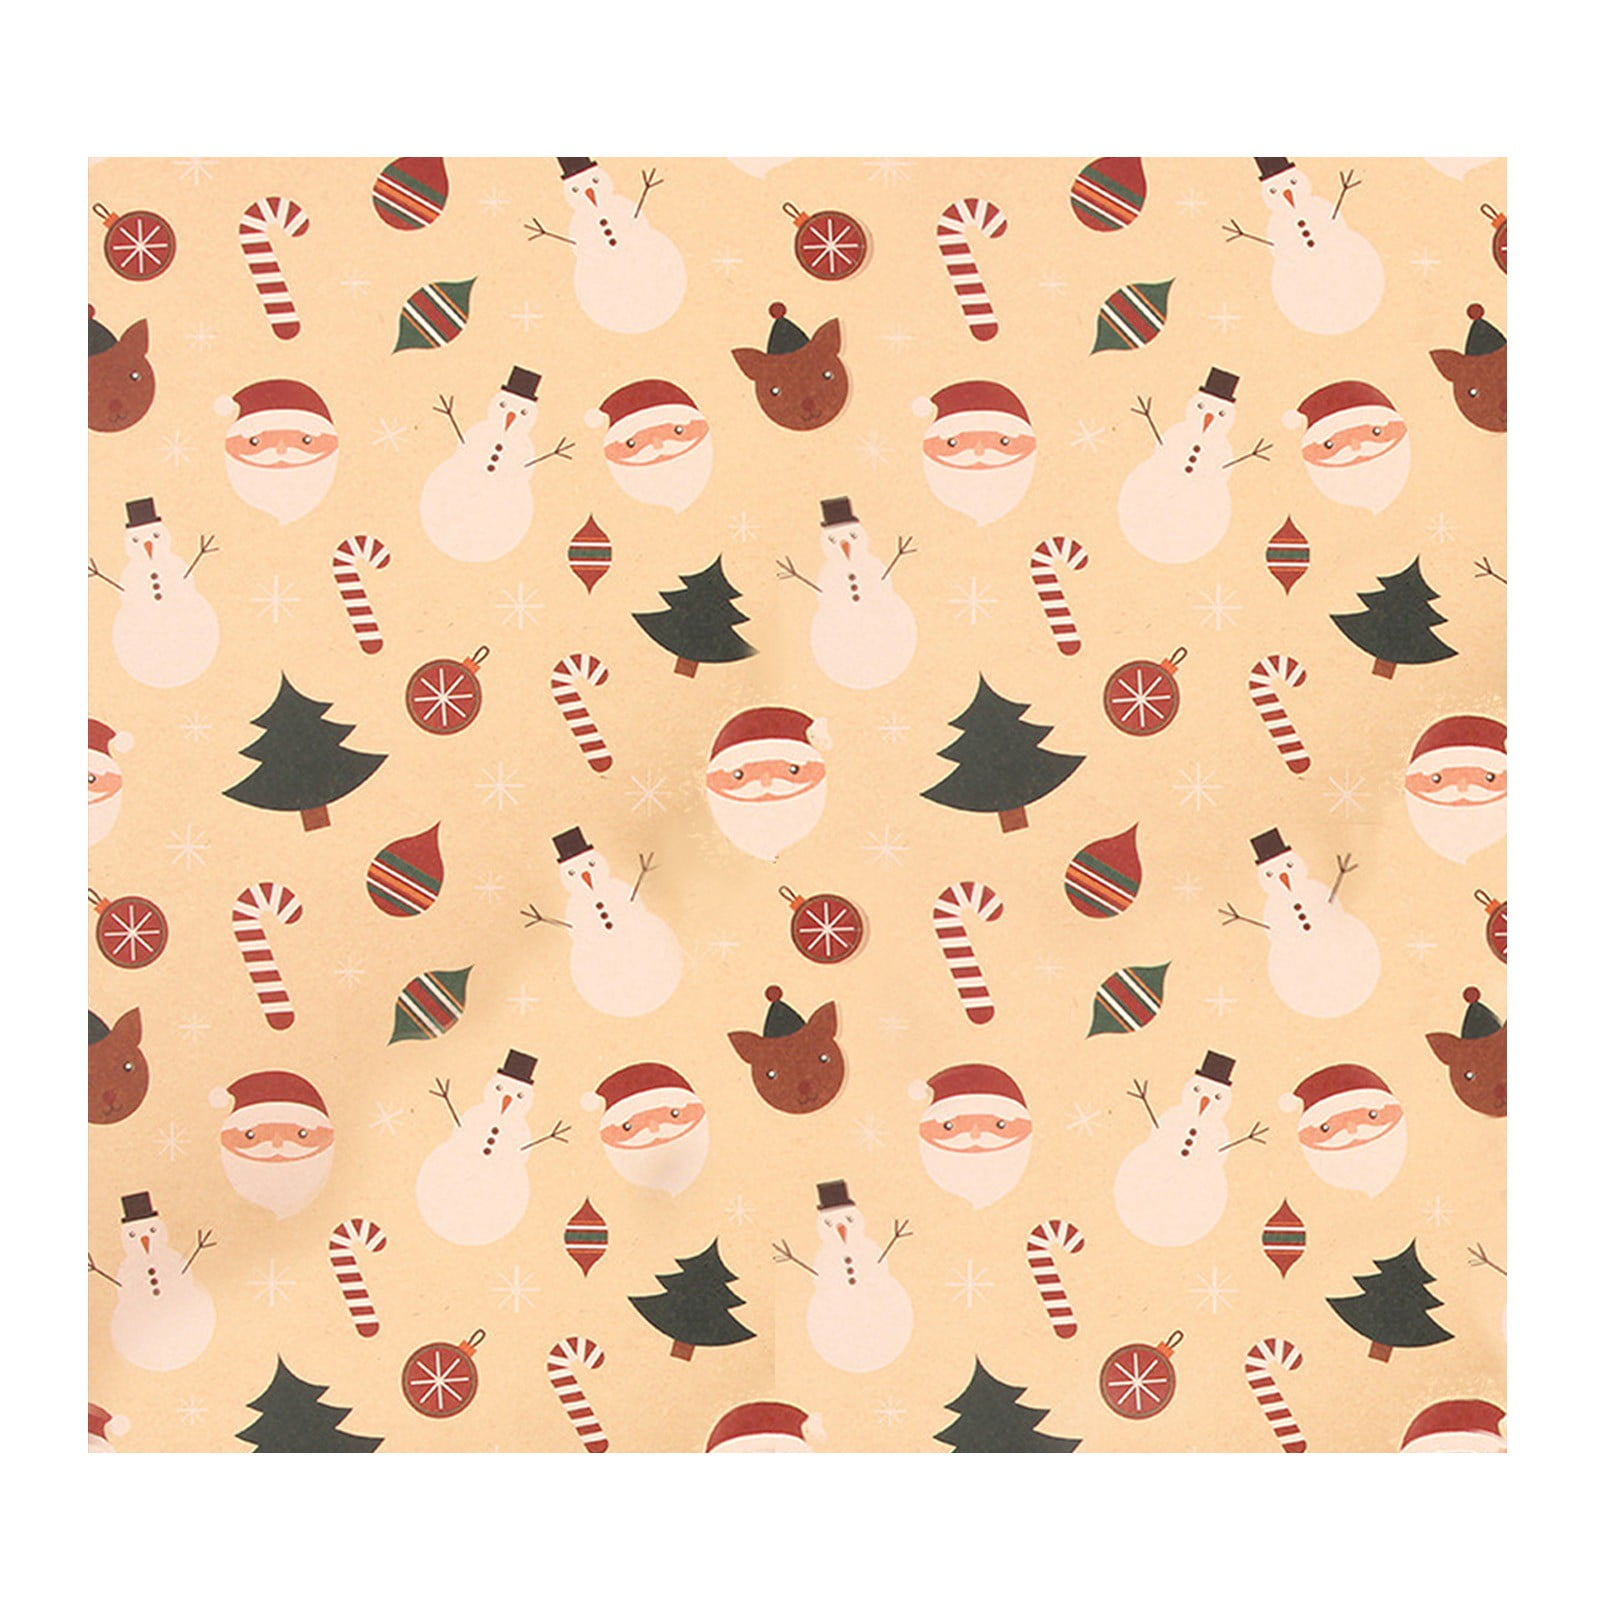 Cute Christmas Wrapping Paper